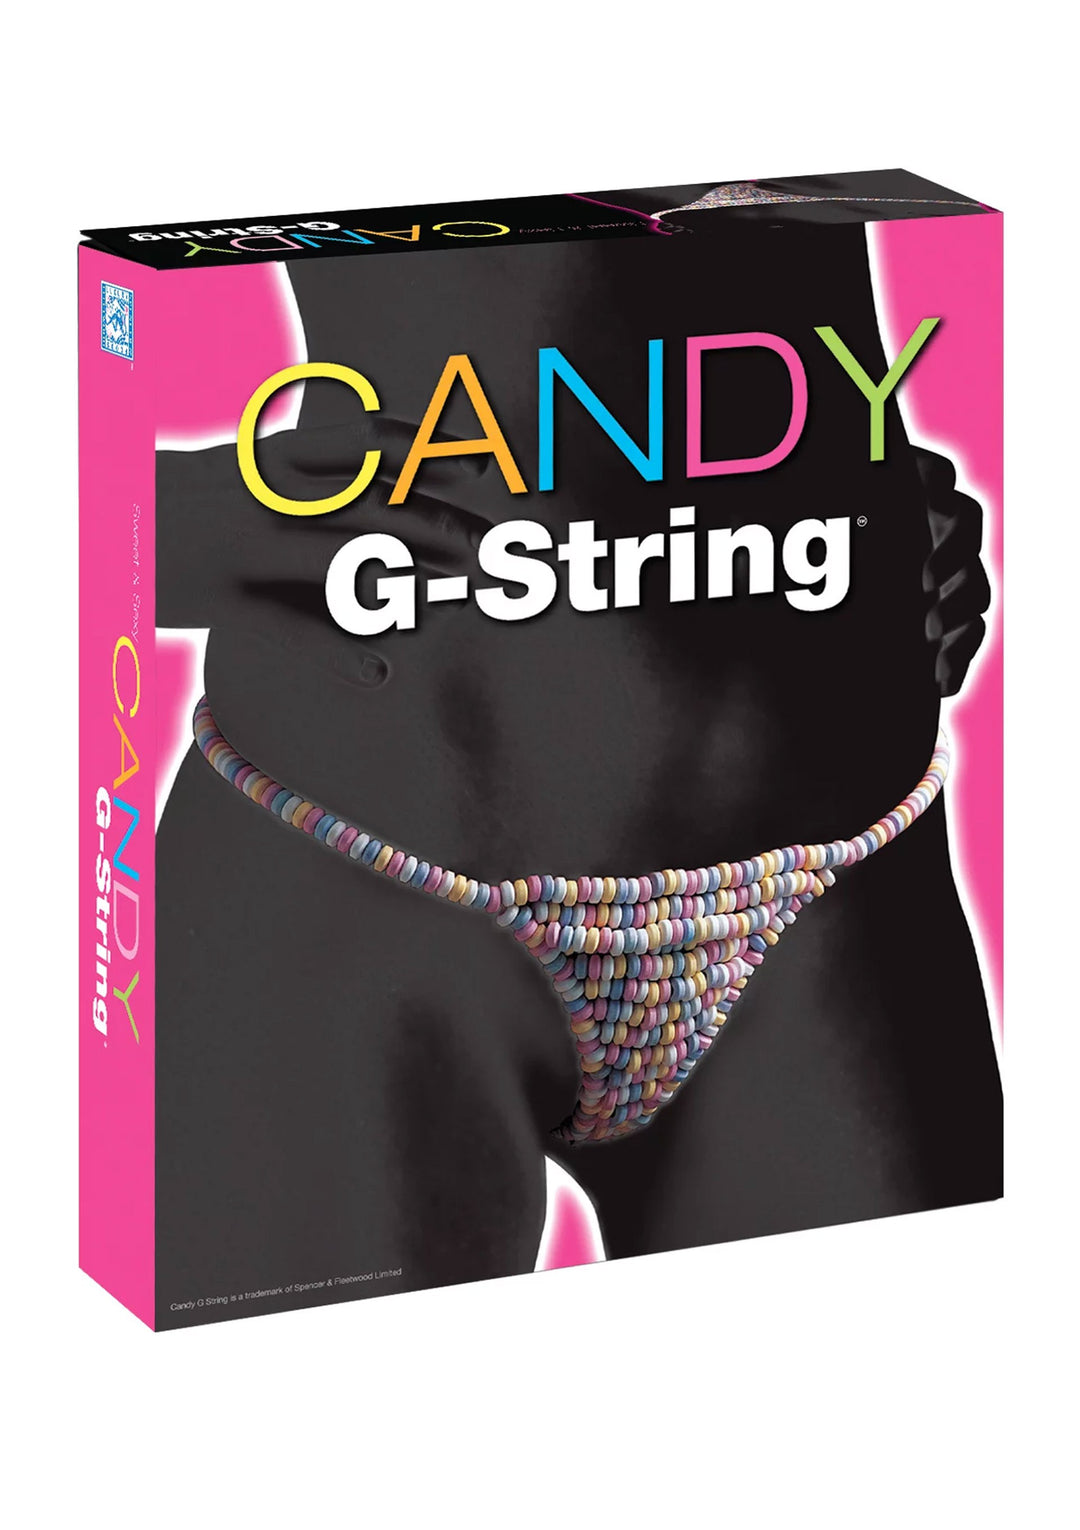 Dolce slip silhouette candy g-string